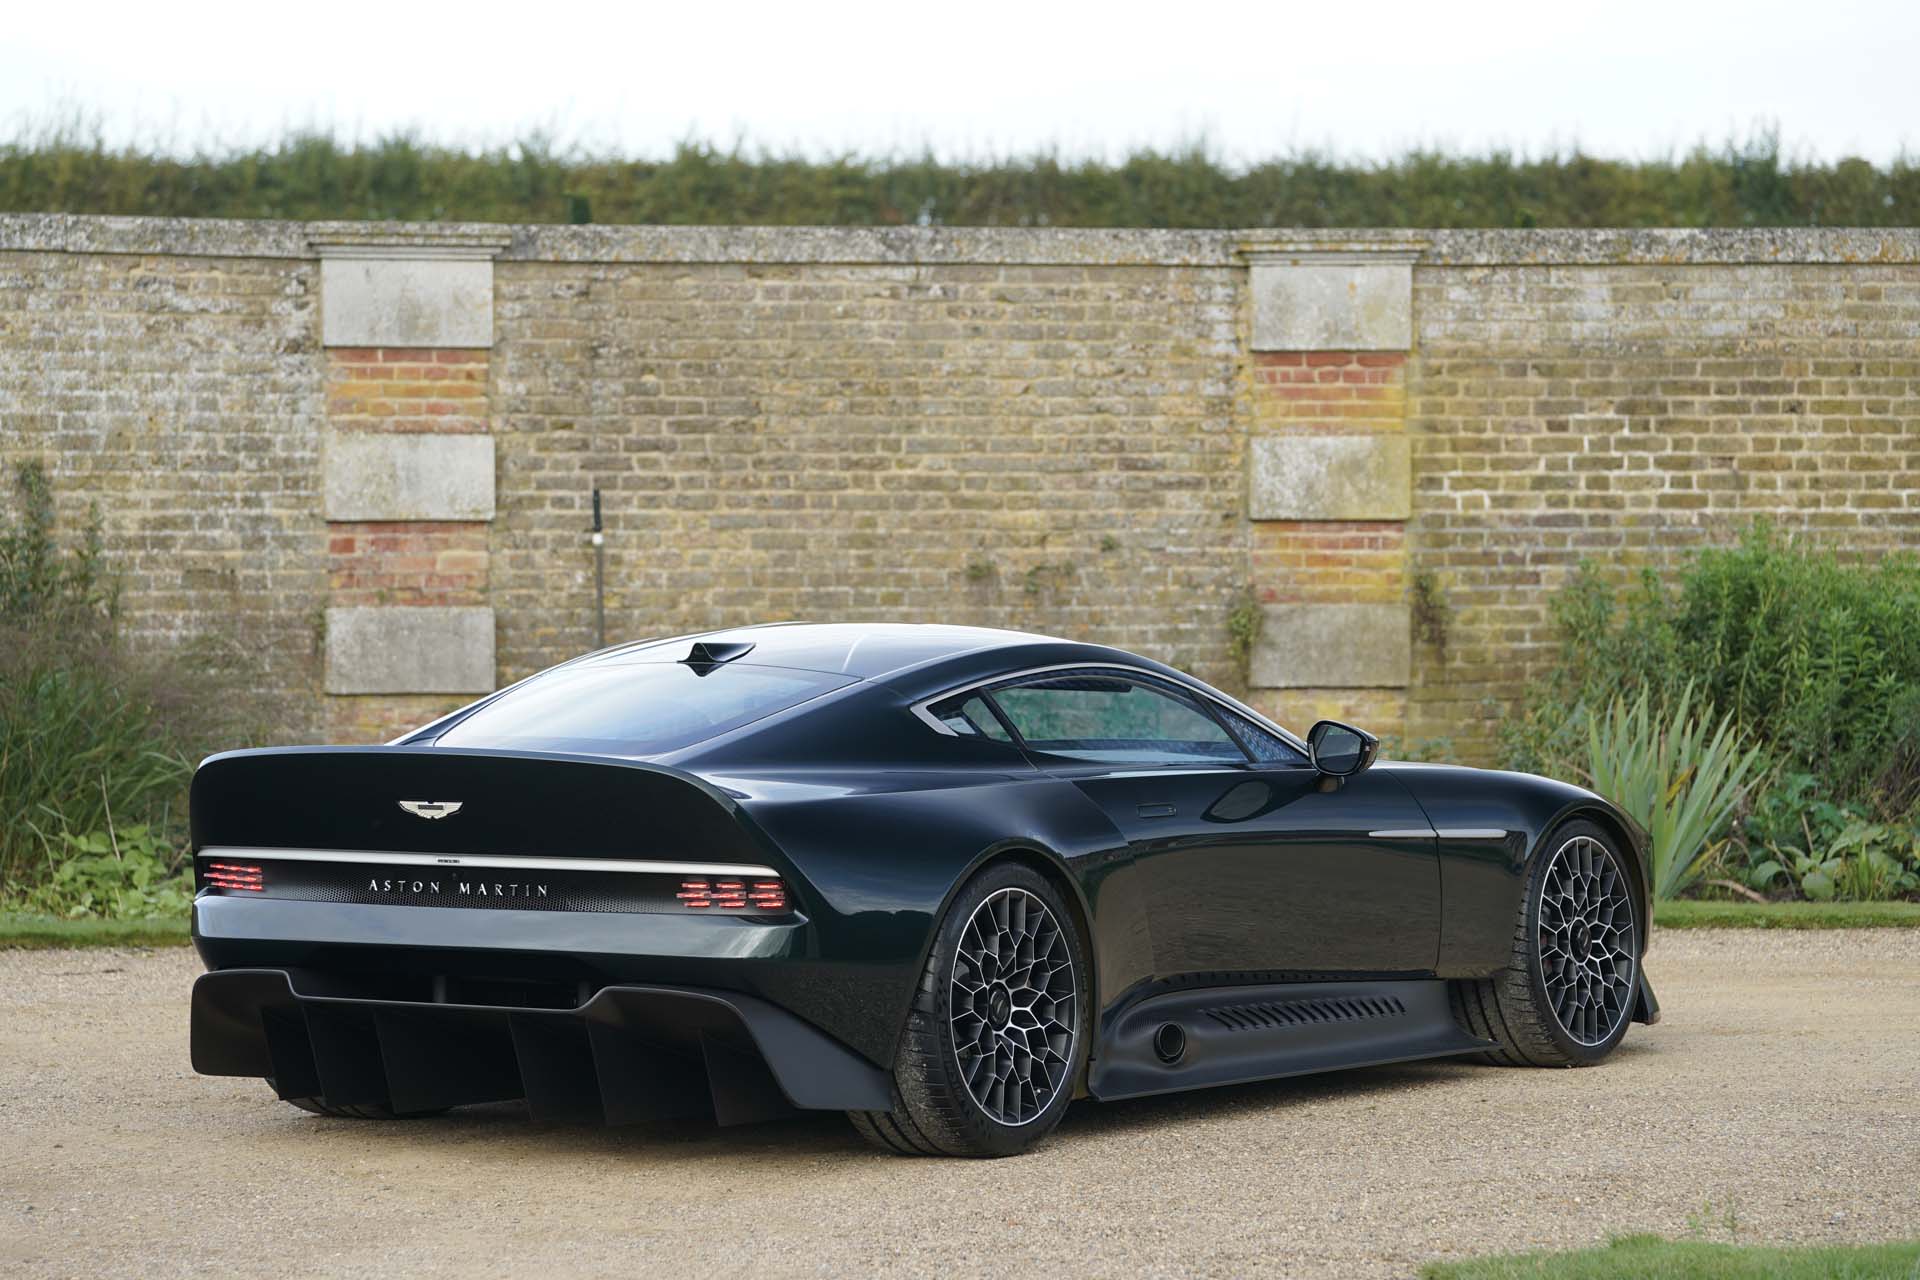 Aston Martin Victor is an 825-hp one-off supercar with a manual